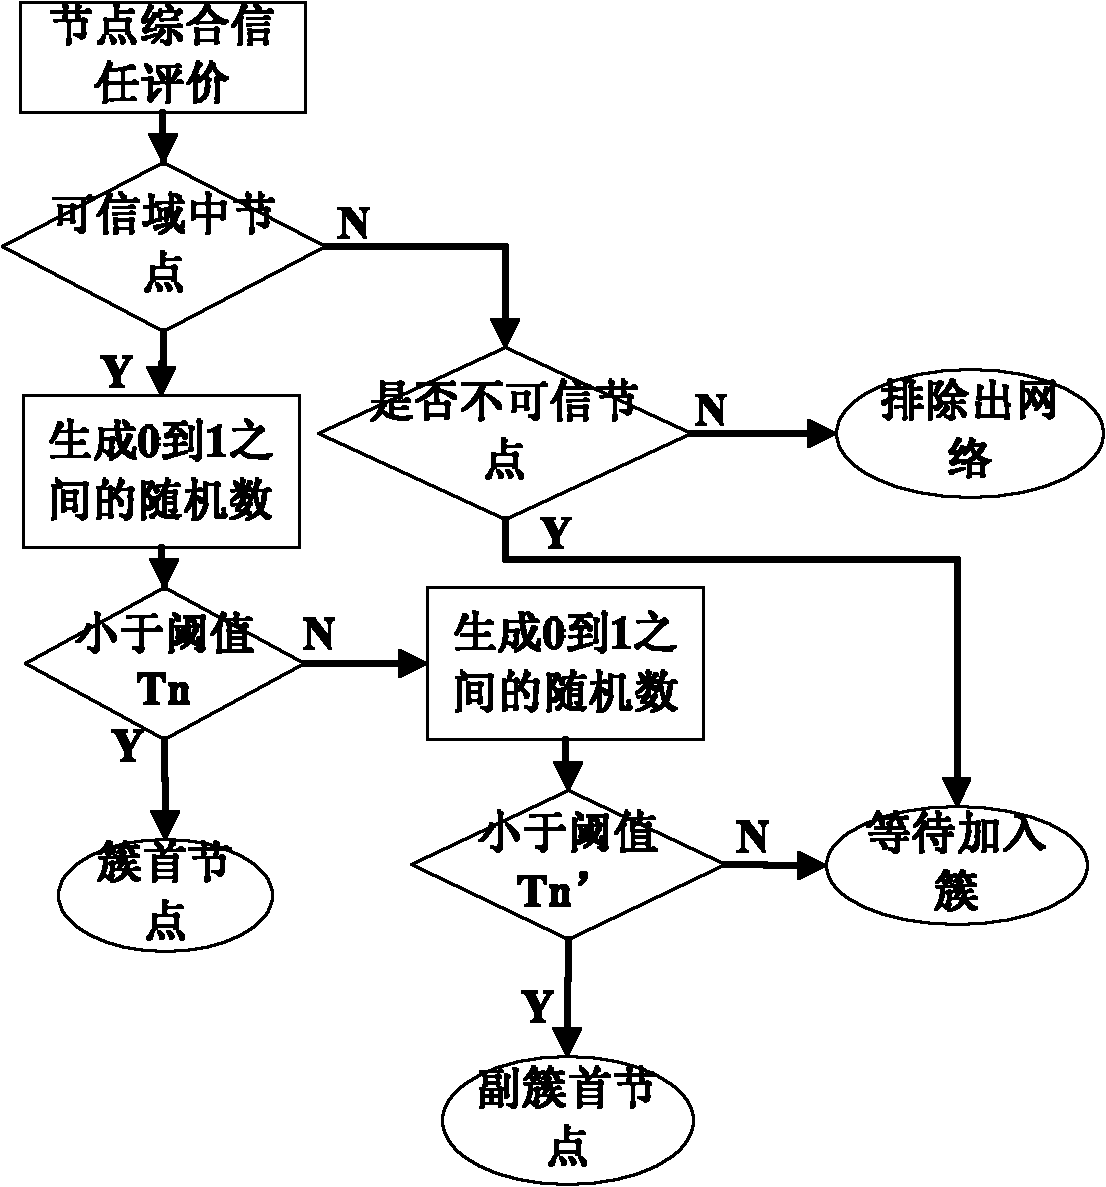 Secure clustering routing management method for wireless sensor network